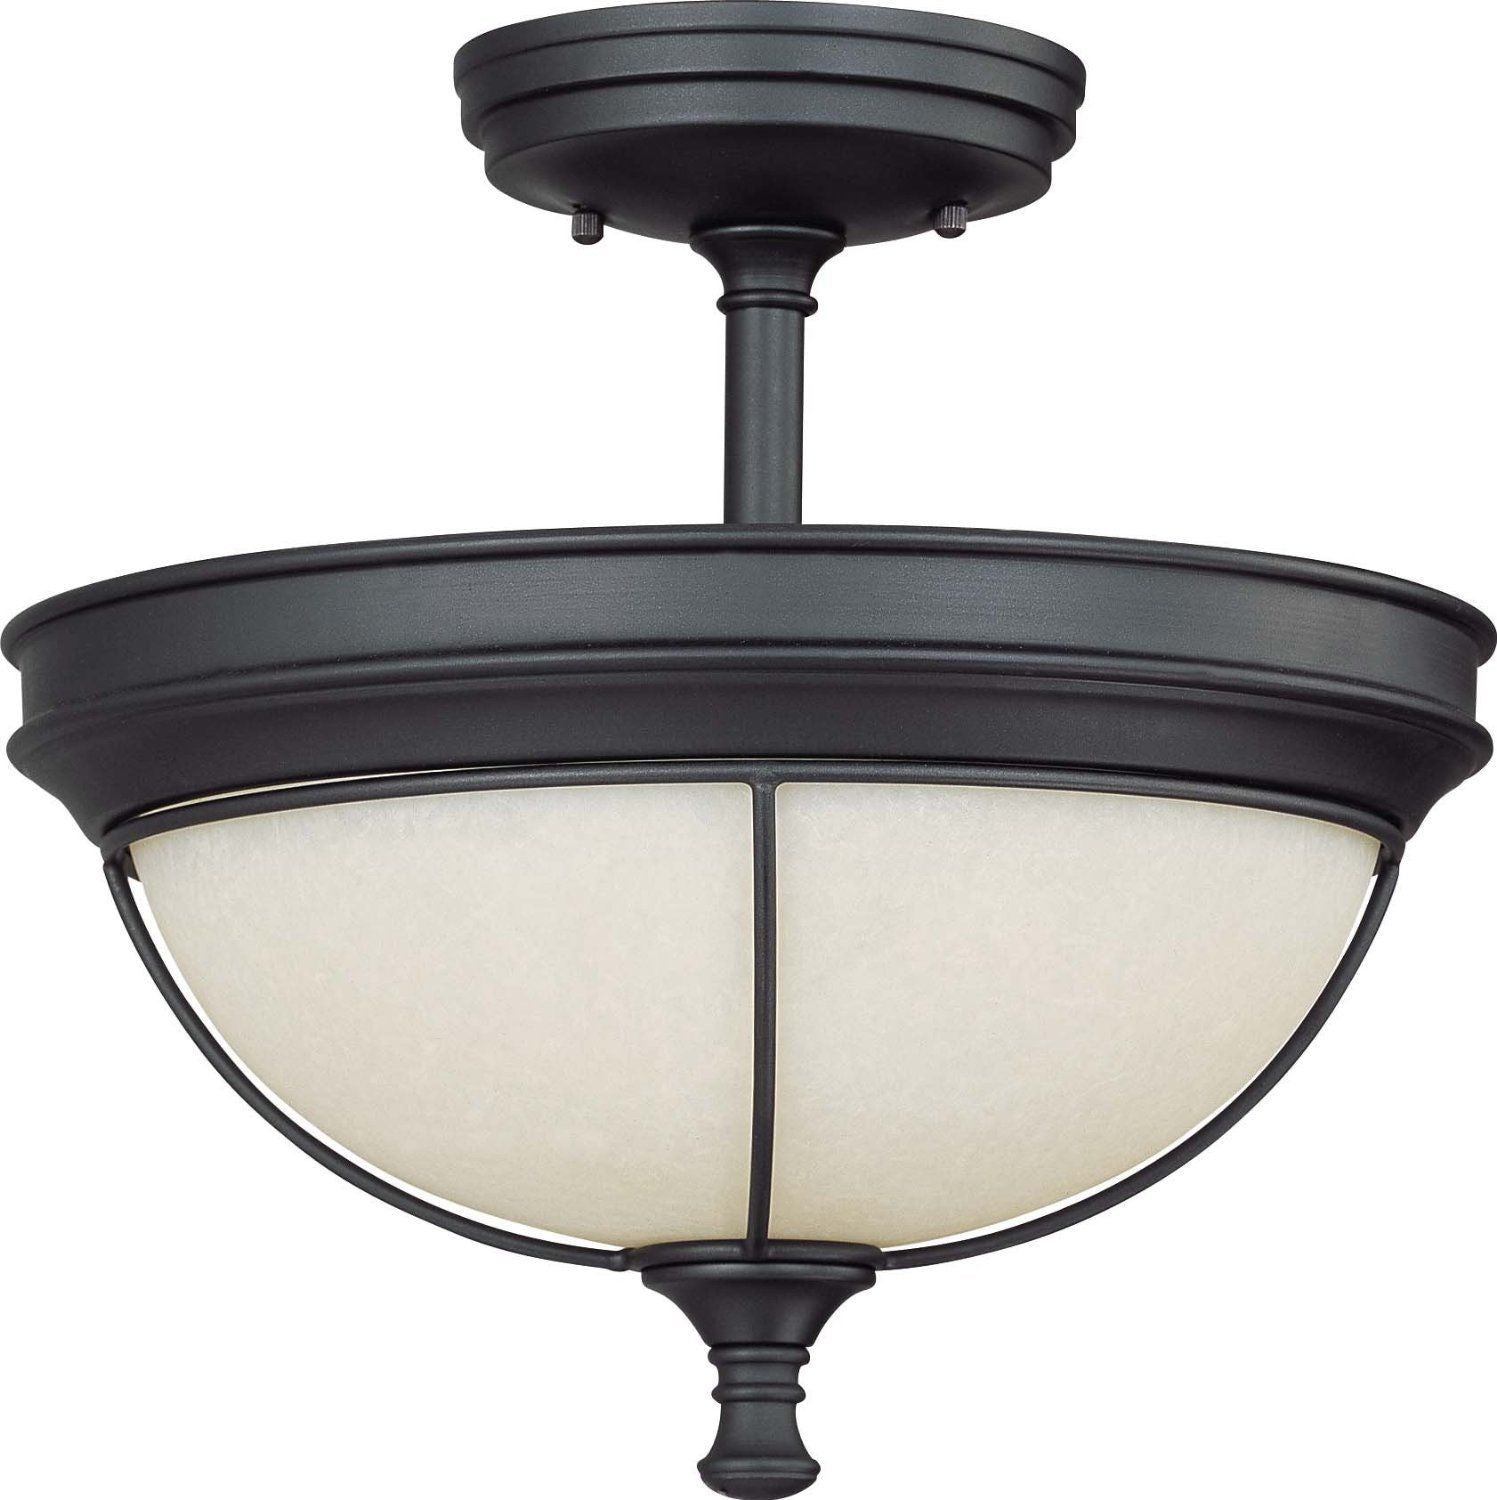 Nuvo Lighting 60-2822 Salem Collection Two Light Semi Flush Ceiling Mount in Aged Bronze Finish